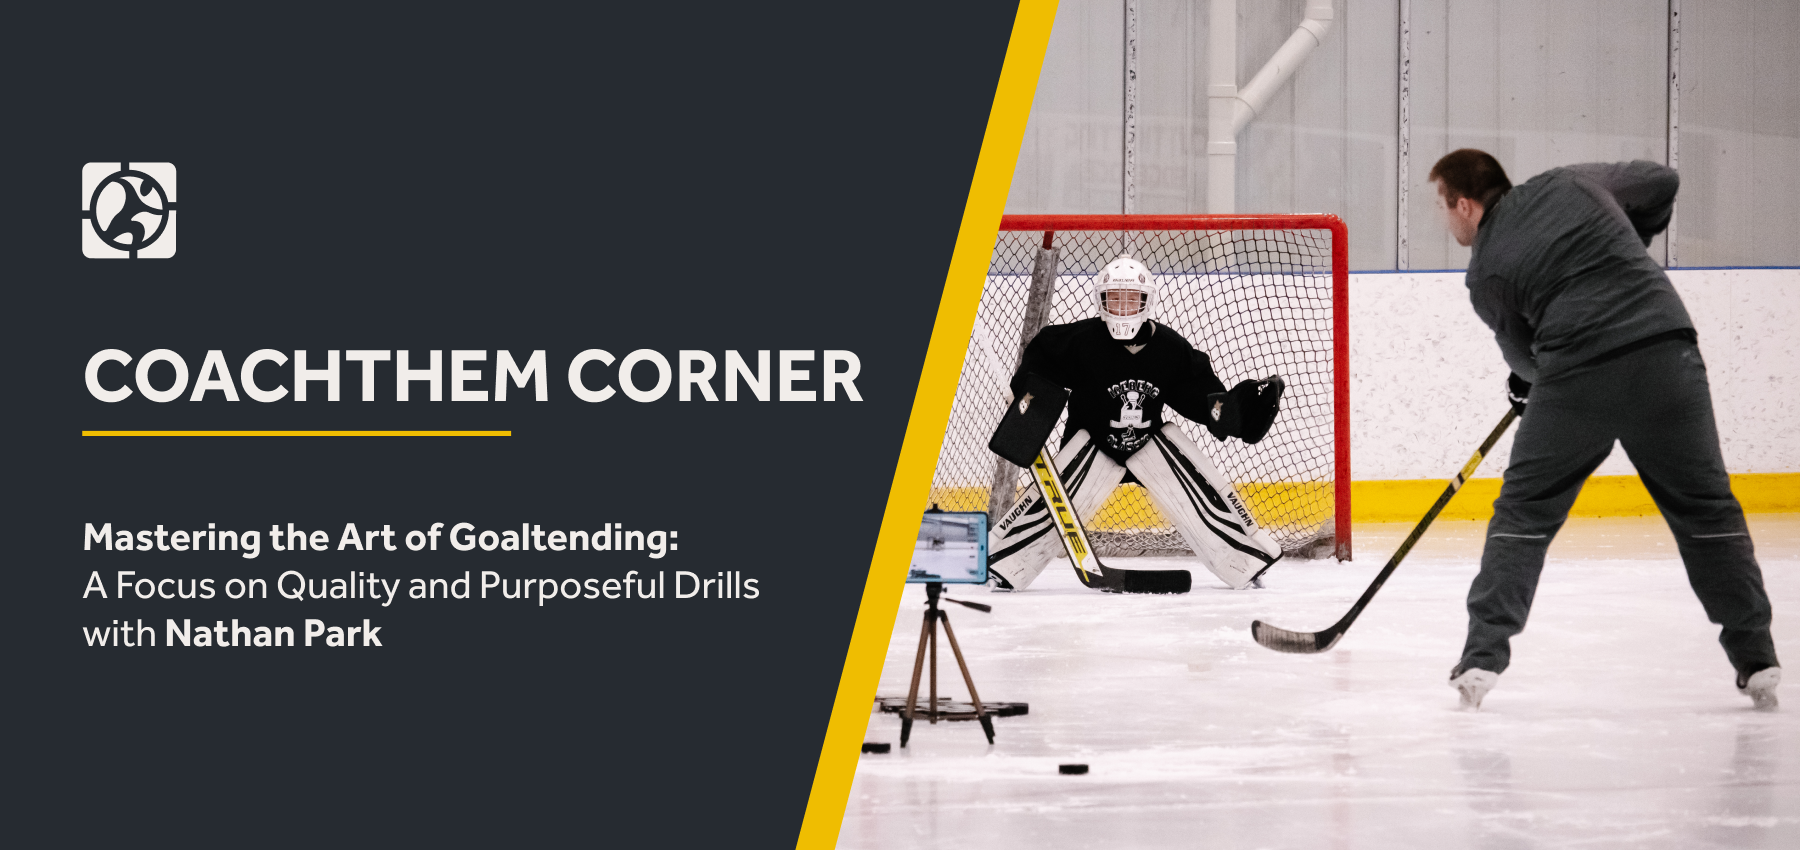 Mastering the Art of Goaltending: A Focus on Quality and Purposeful Drills with Nathan Park